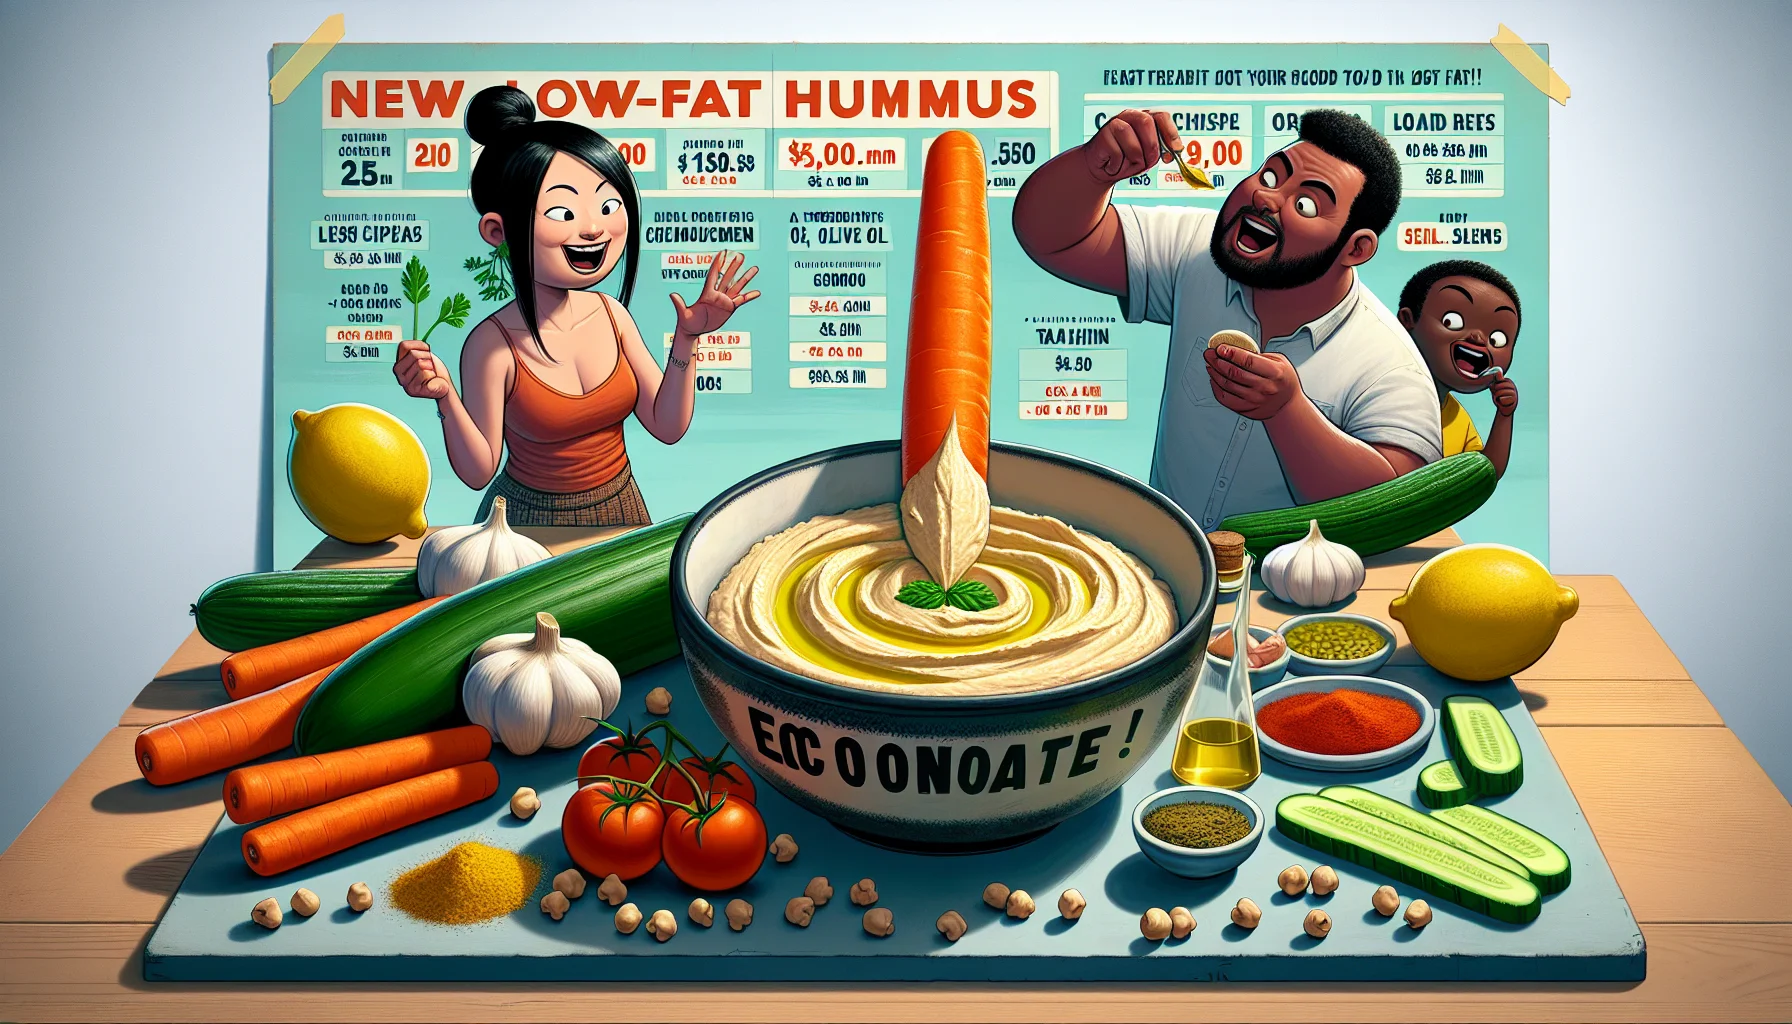 Imagine a humorous scene focused on a low-fat hummus recipe. A detailed spread is presented, showcasing all the economical ingredients: chickpeas, garlic, lemon, cumin, tahini, olive oil and other ingredients that contribute to its low-fat content. Three animated characters, an Asian woman, a Caucasian man, and a Black child, are seen enjoying the hummus with an oversized carrot stick, a cucumber, and a radish respectively. The characters are depicted with comically exaggerated expressions of delight, showcasing their enjoyment of this cheap and healthy snack. The background displays a colorful montage of humorous infographics detailing the cost savings and health benefits of the recipe.